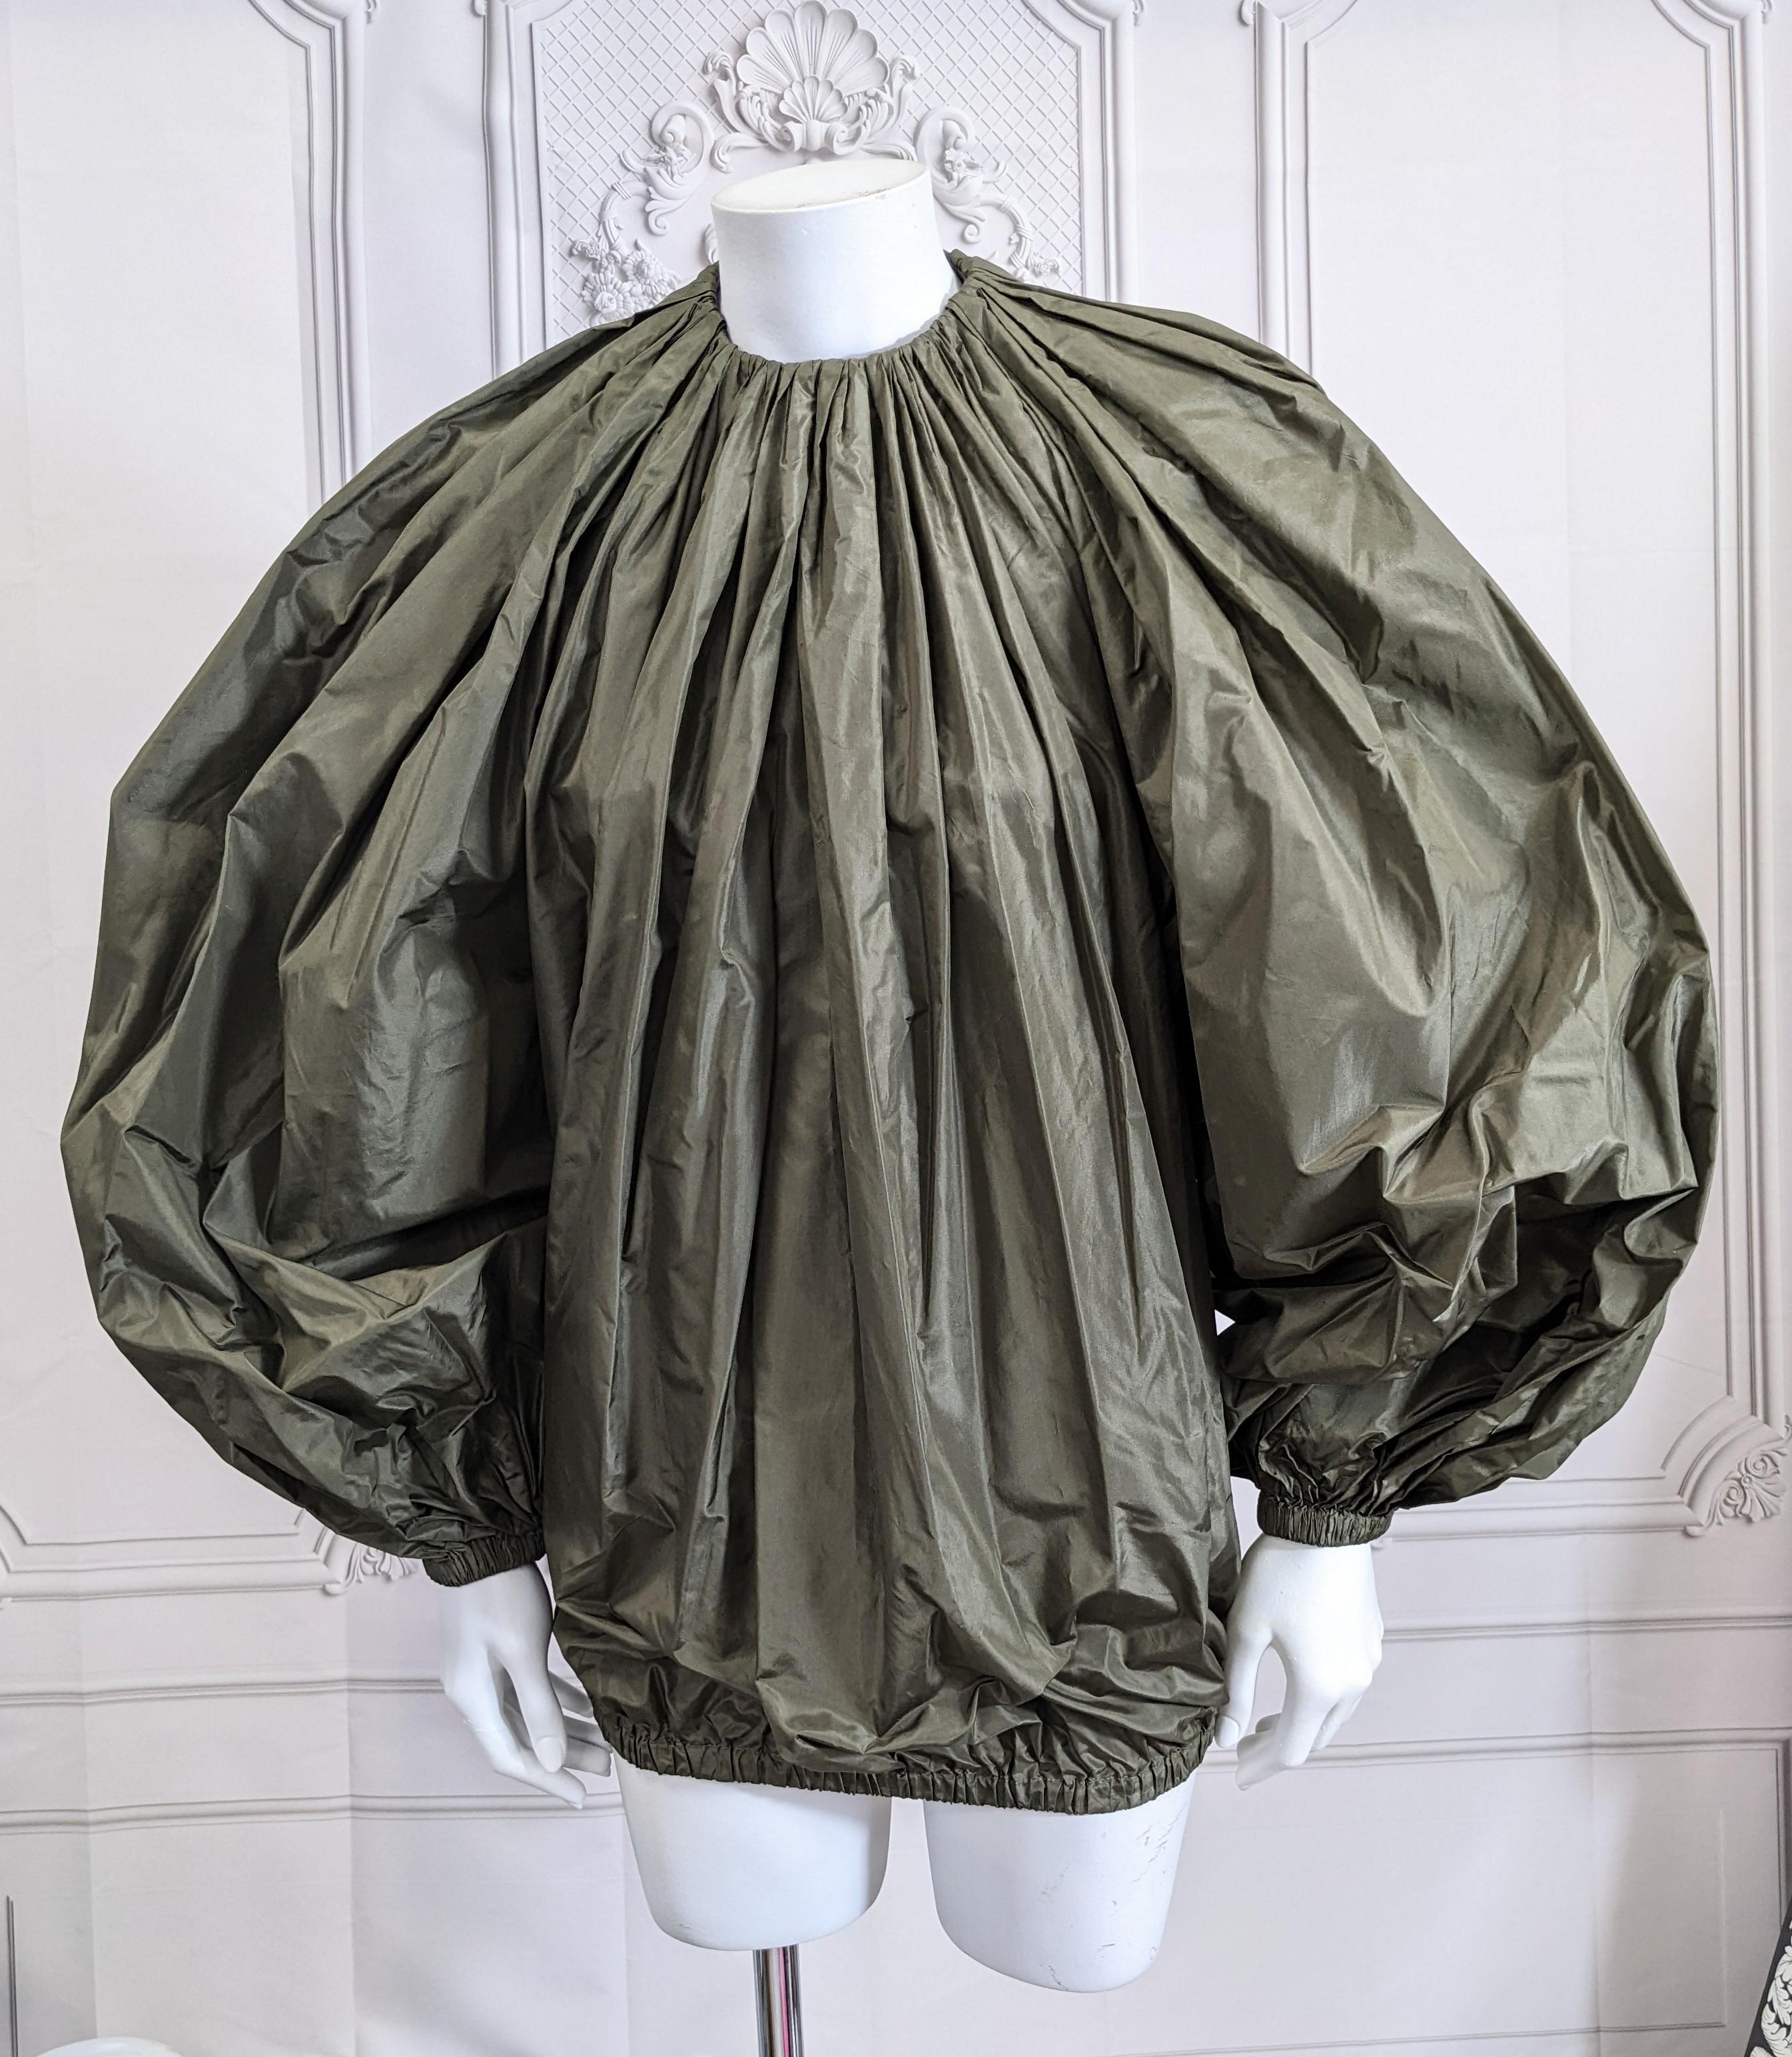 Alber Elbaz for Yves Saint Laurent A/H 2000 deep olive-brown paper tissue silk taffeta blouse with gathered neckline and oversized balloon sleeves. Elongated hip length blouse gathered at hem with elastic. Back is completely slit open but closed at